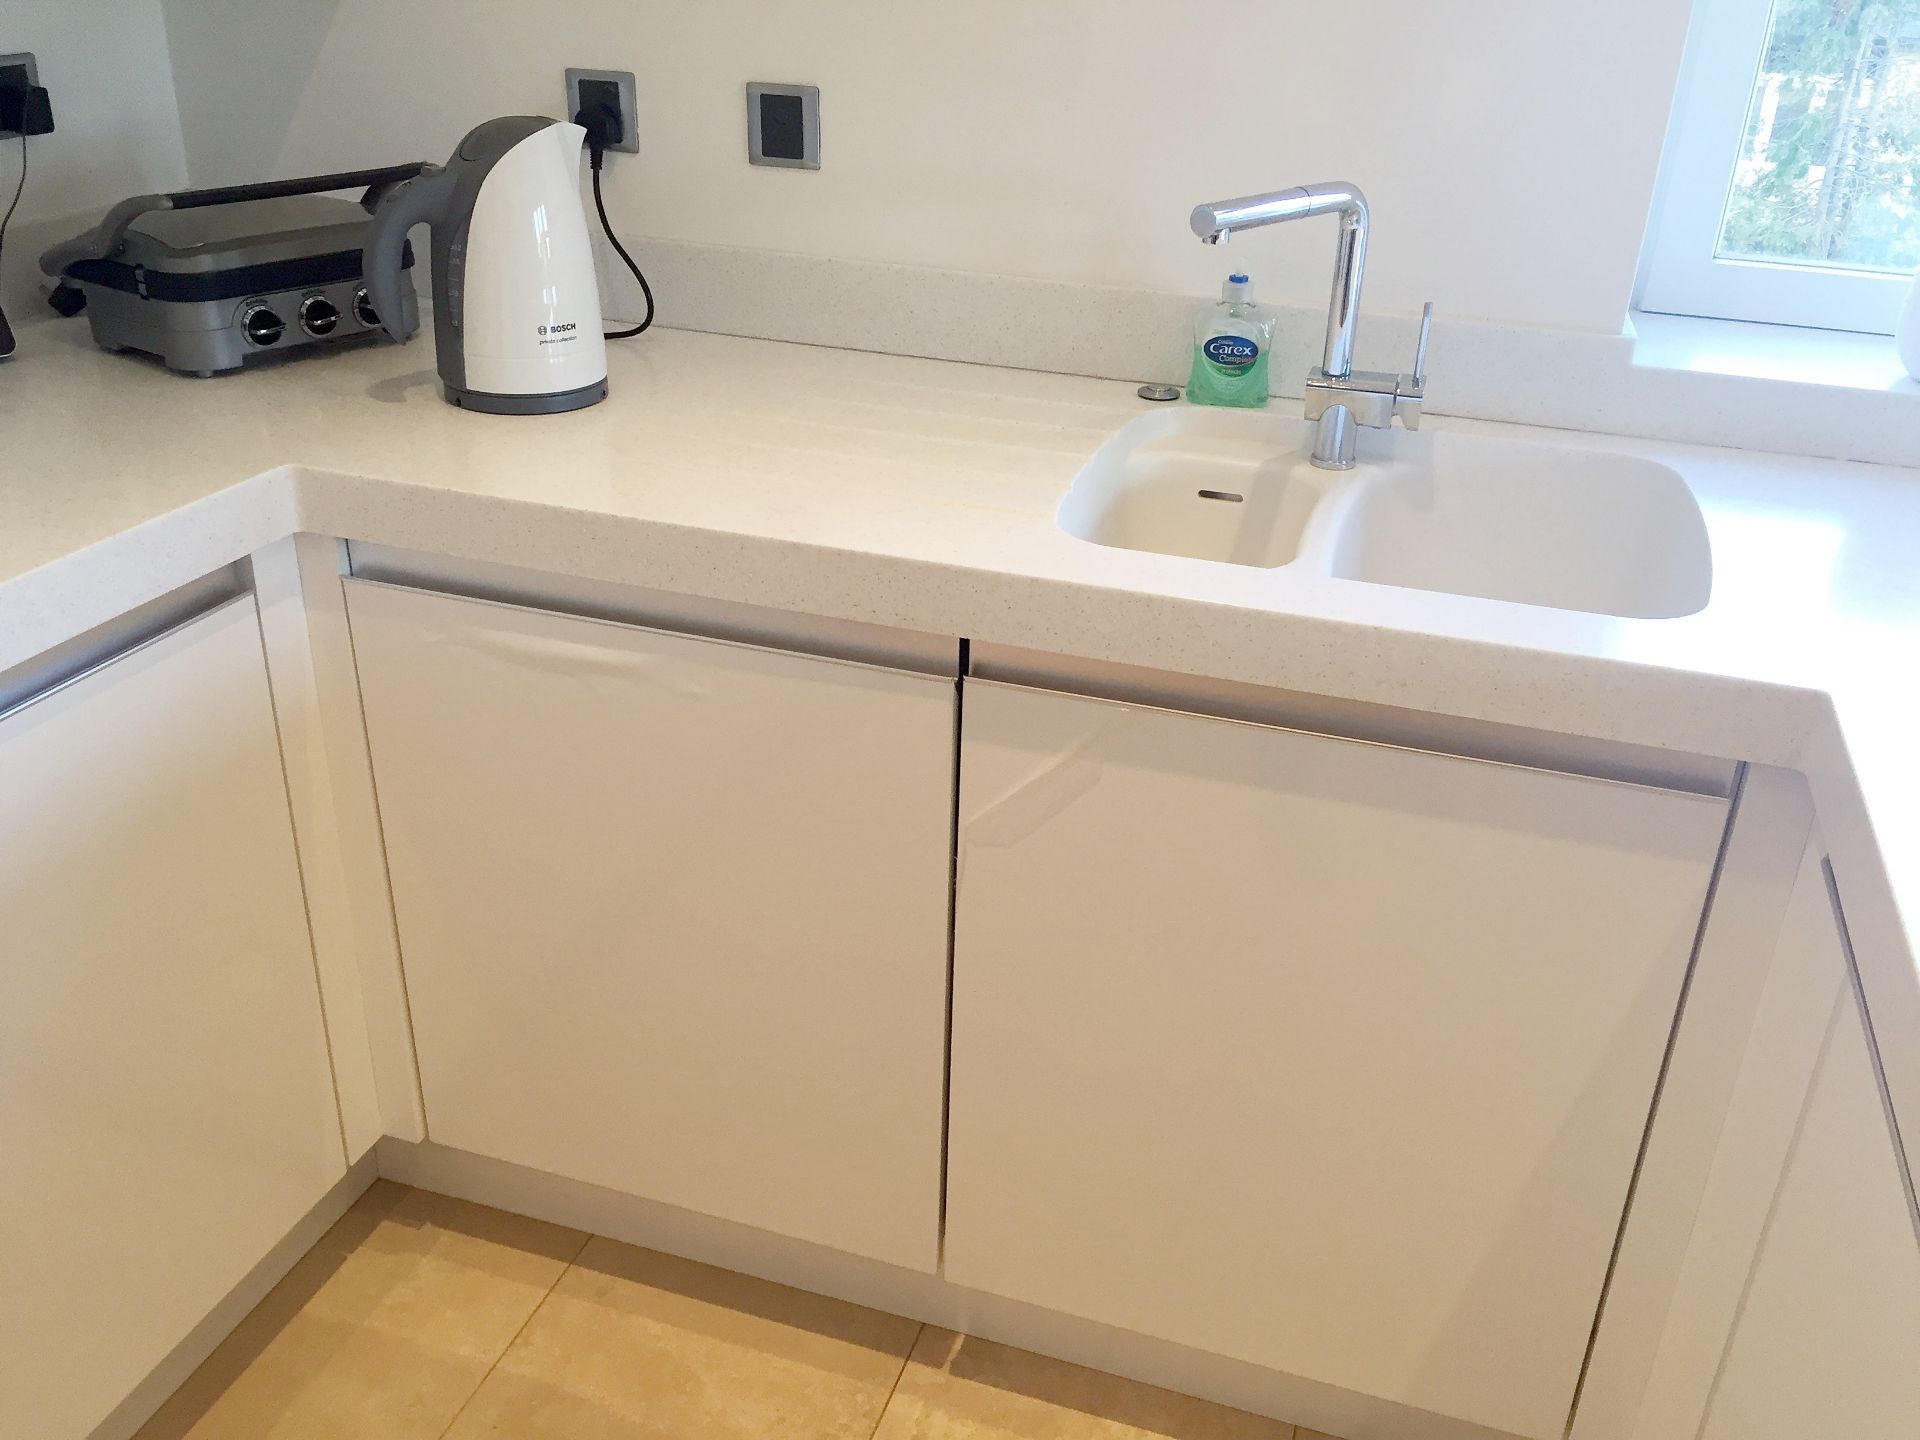 1 x Modern Gloss White Bespoke Fitted Kitchen By Johnson & Johnson - Features Integral Neff - Image 25 of 54